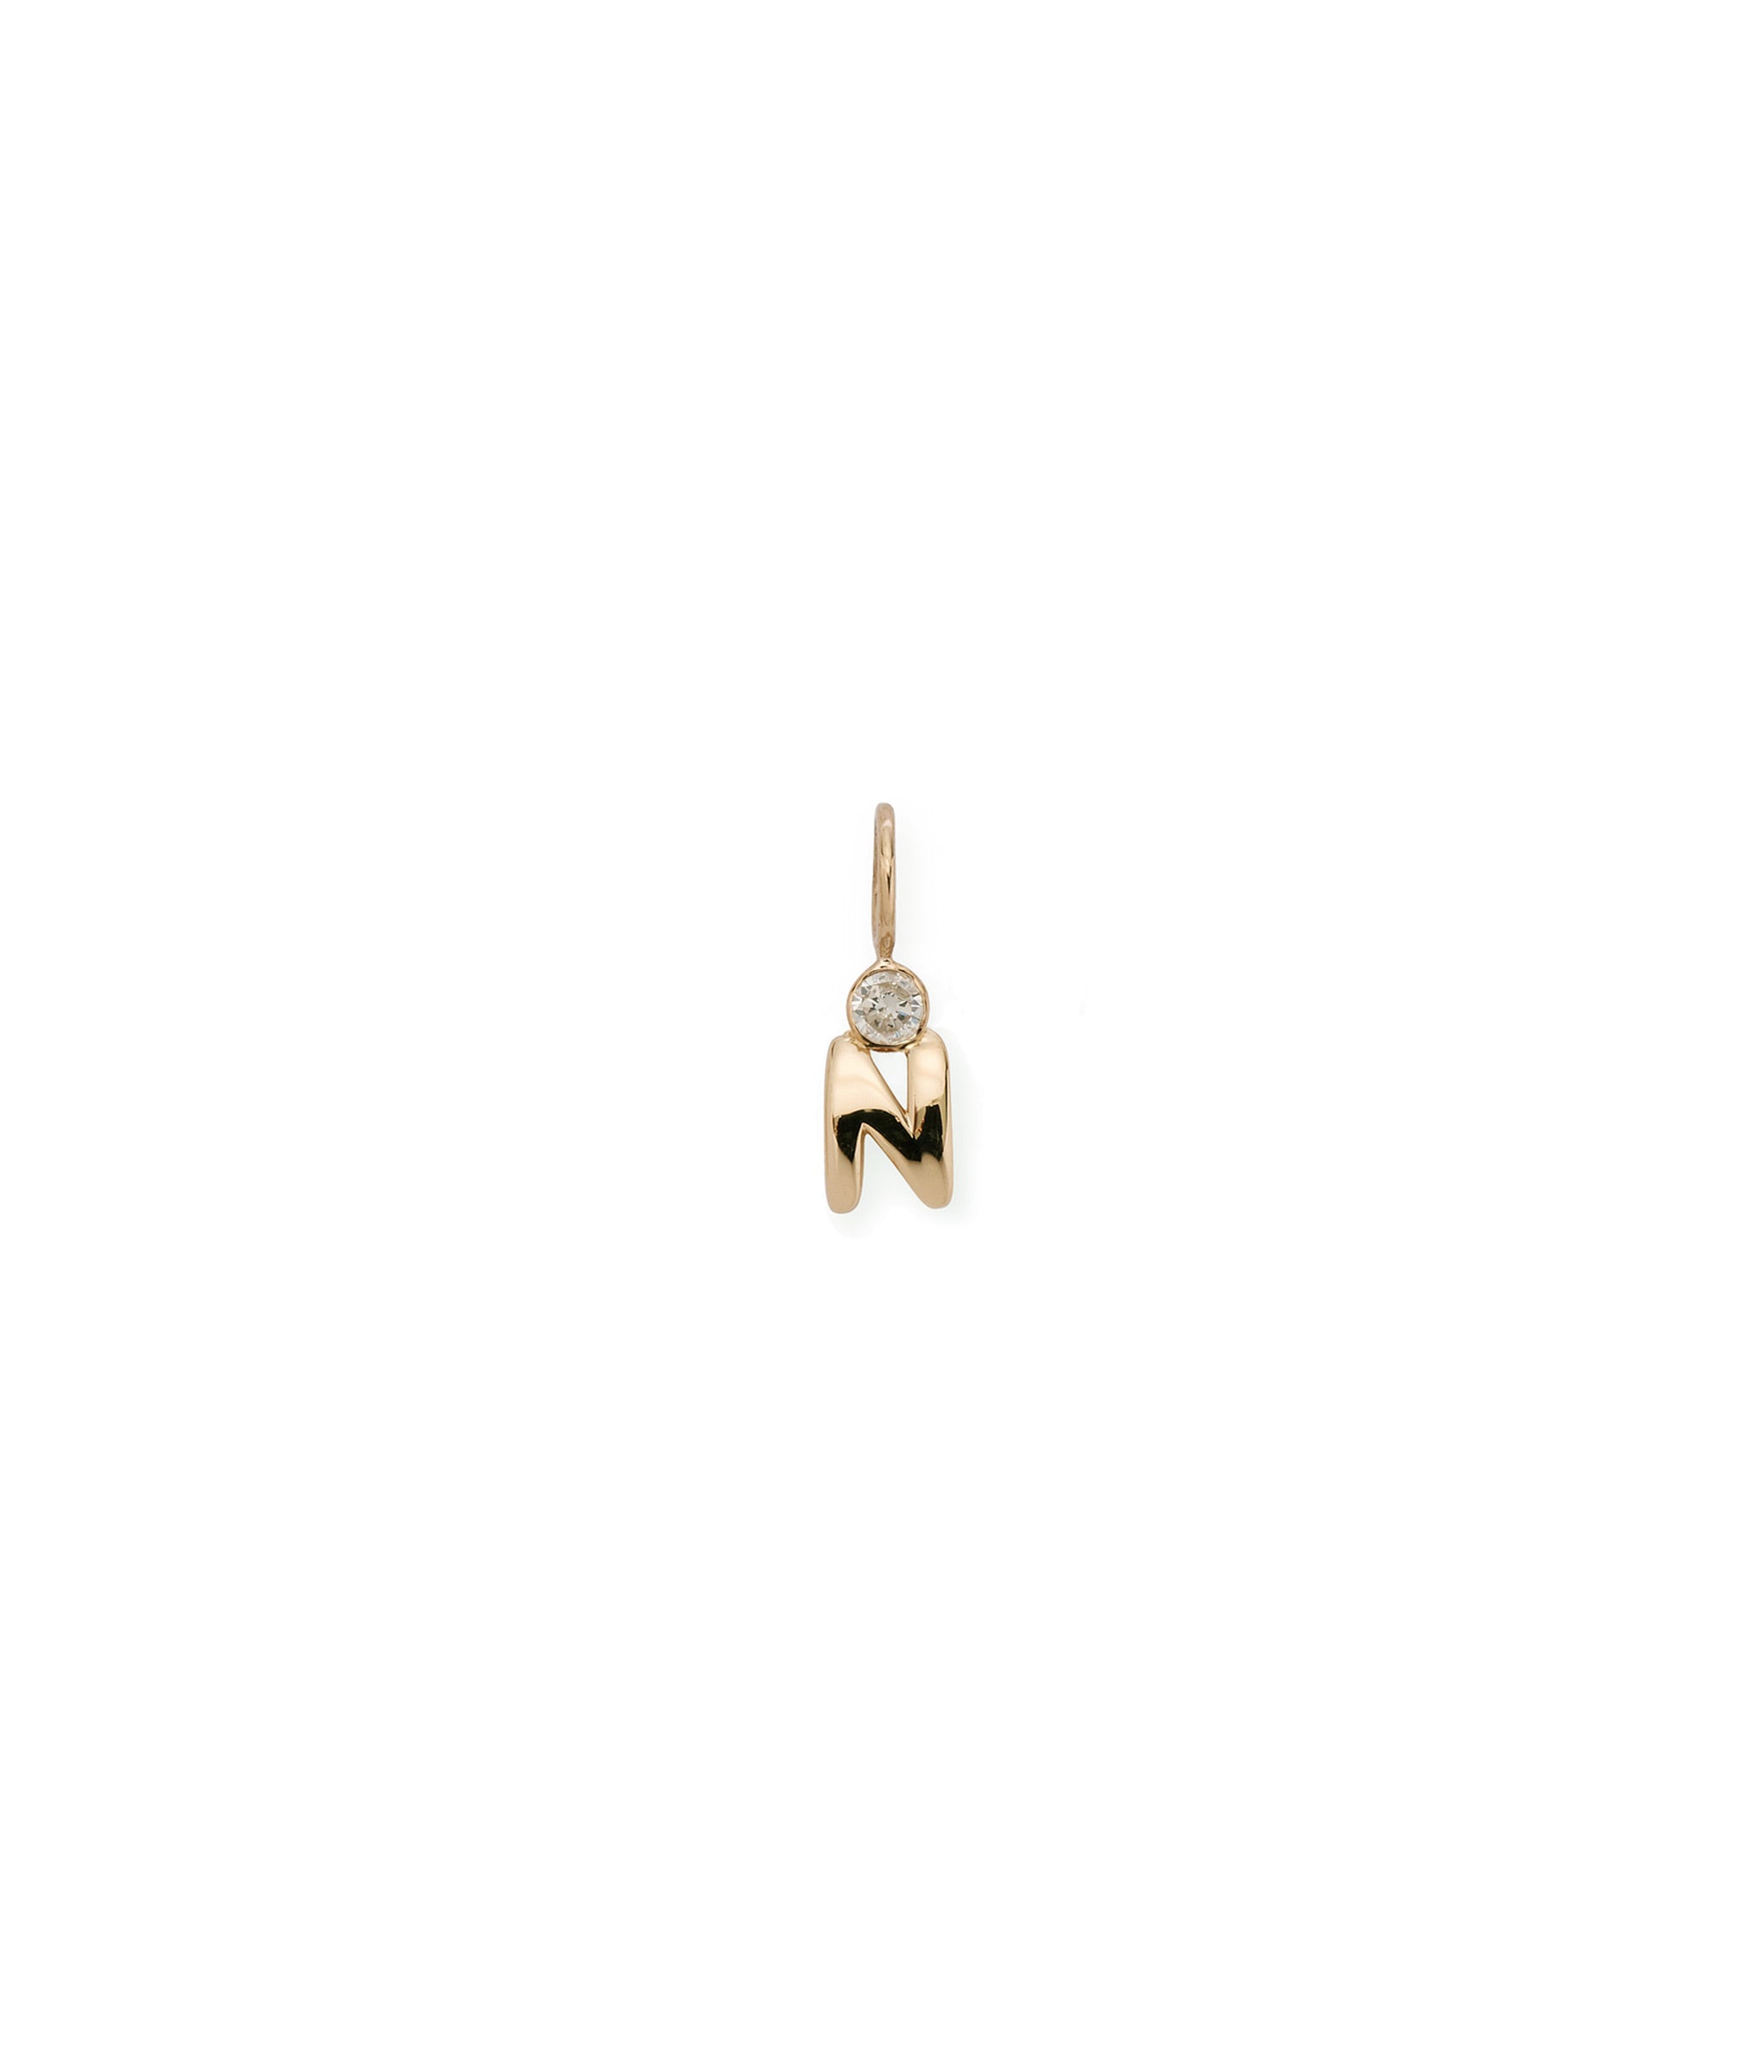 Alphabet Soup "N" Charm. Puffy mini 14k gold letter "N" charm with round diamond accent.